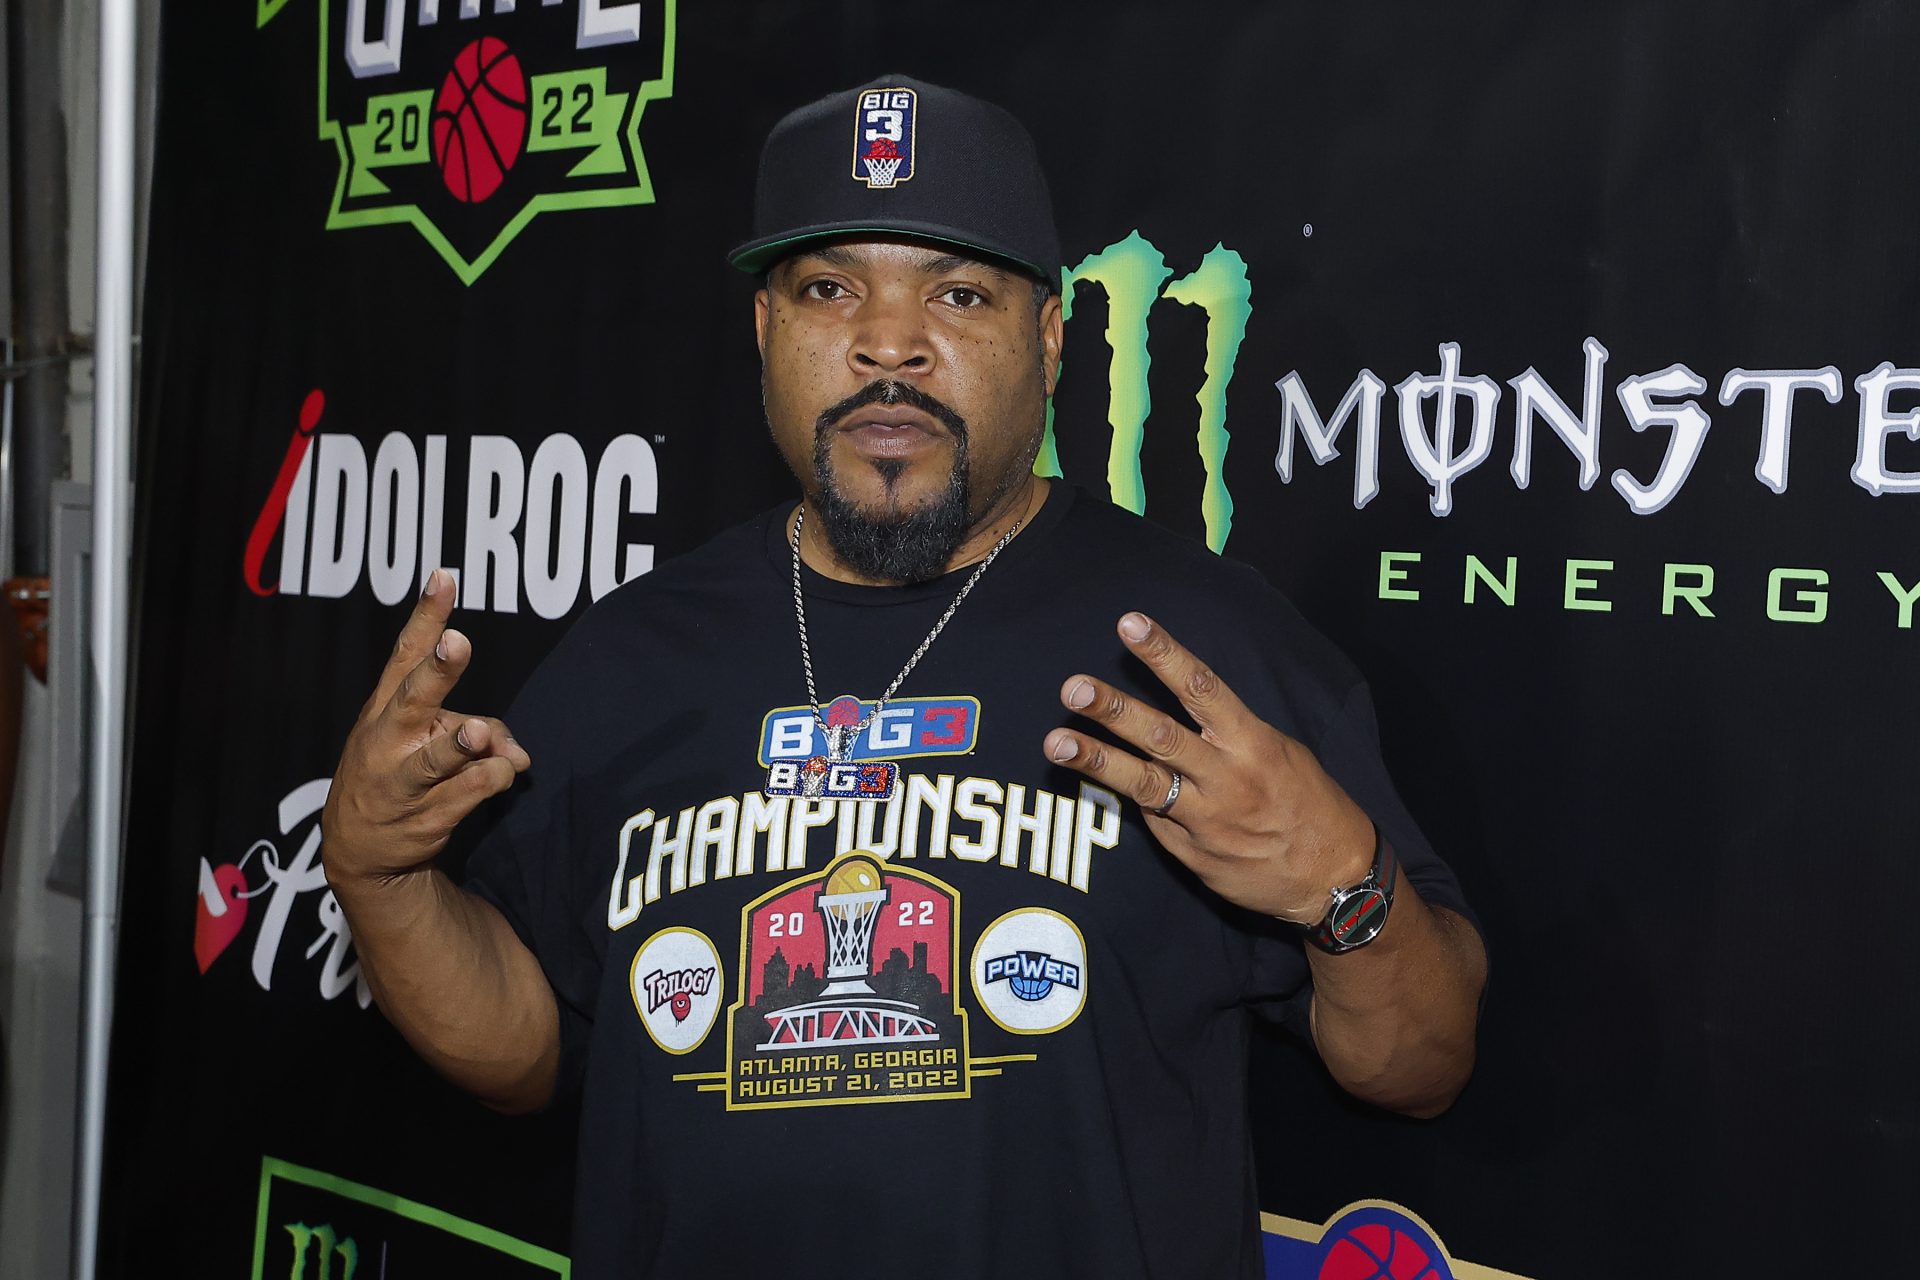 Ice Cube says he's trying to get his "Friday" films from up under Warner Bros. after he says they rejected two of his scripts.